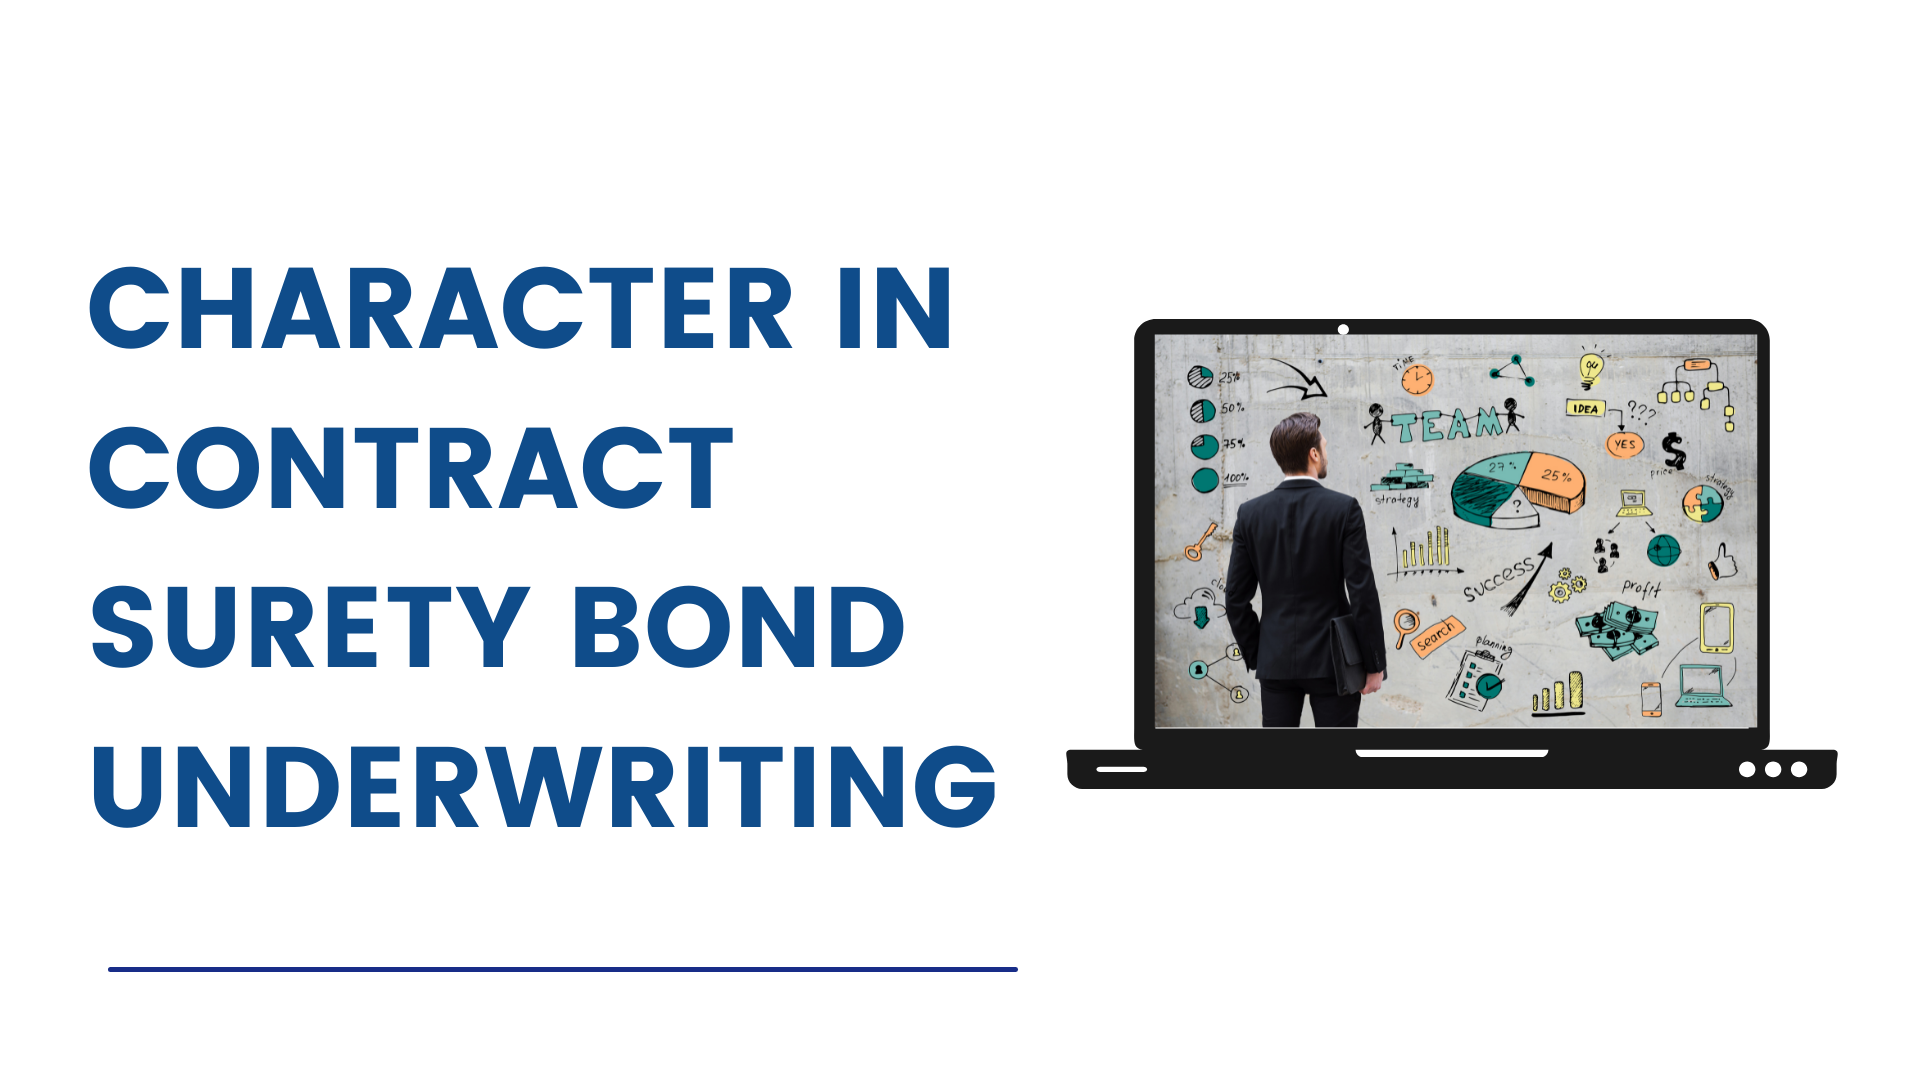 surety bond - What are the three underwriting characteristics of bonds - man in a laptop